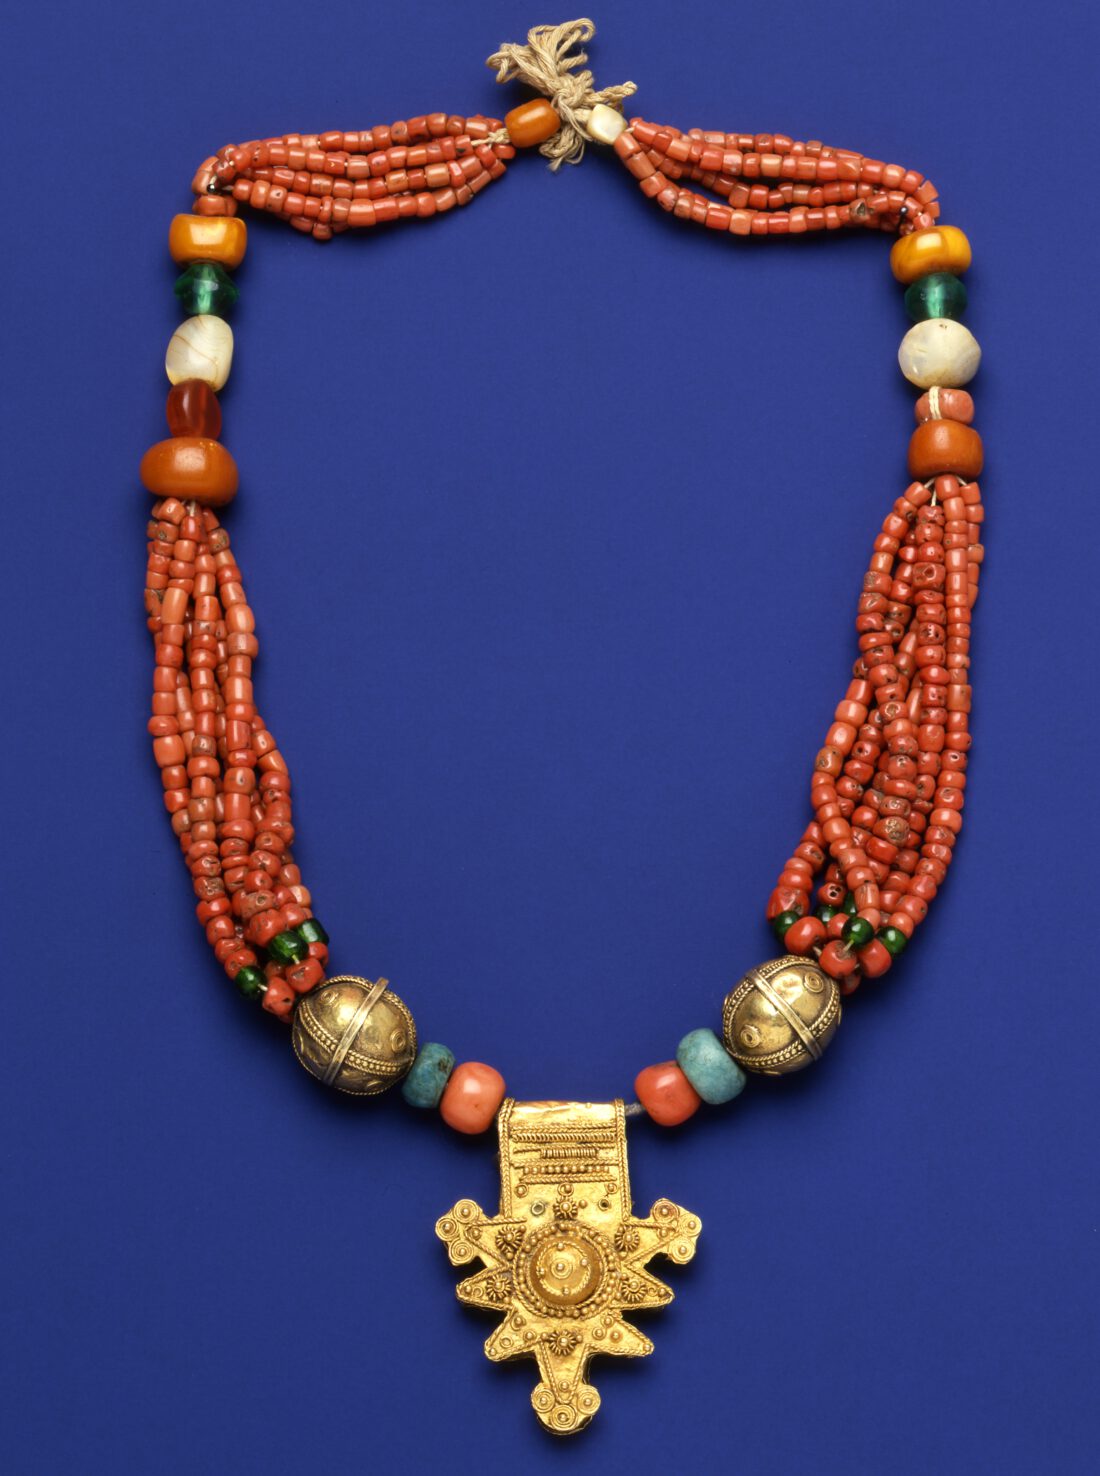 Necklace with mainly red beads and a gold pendant